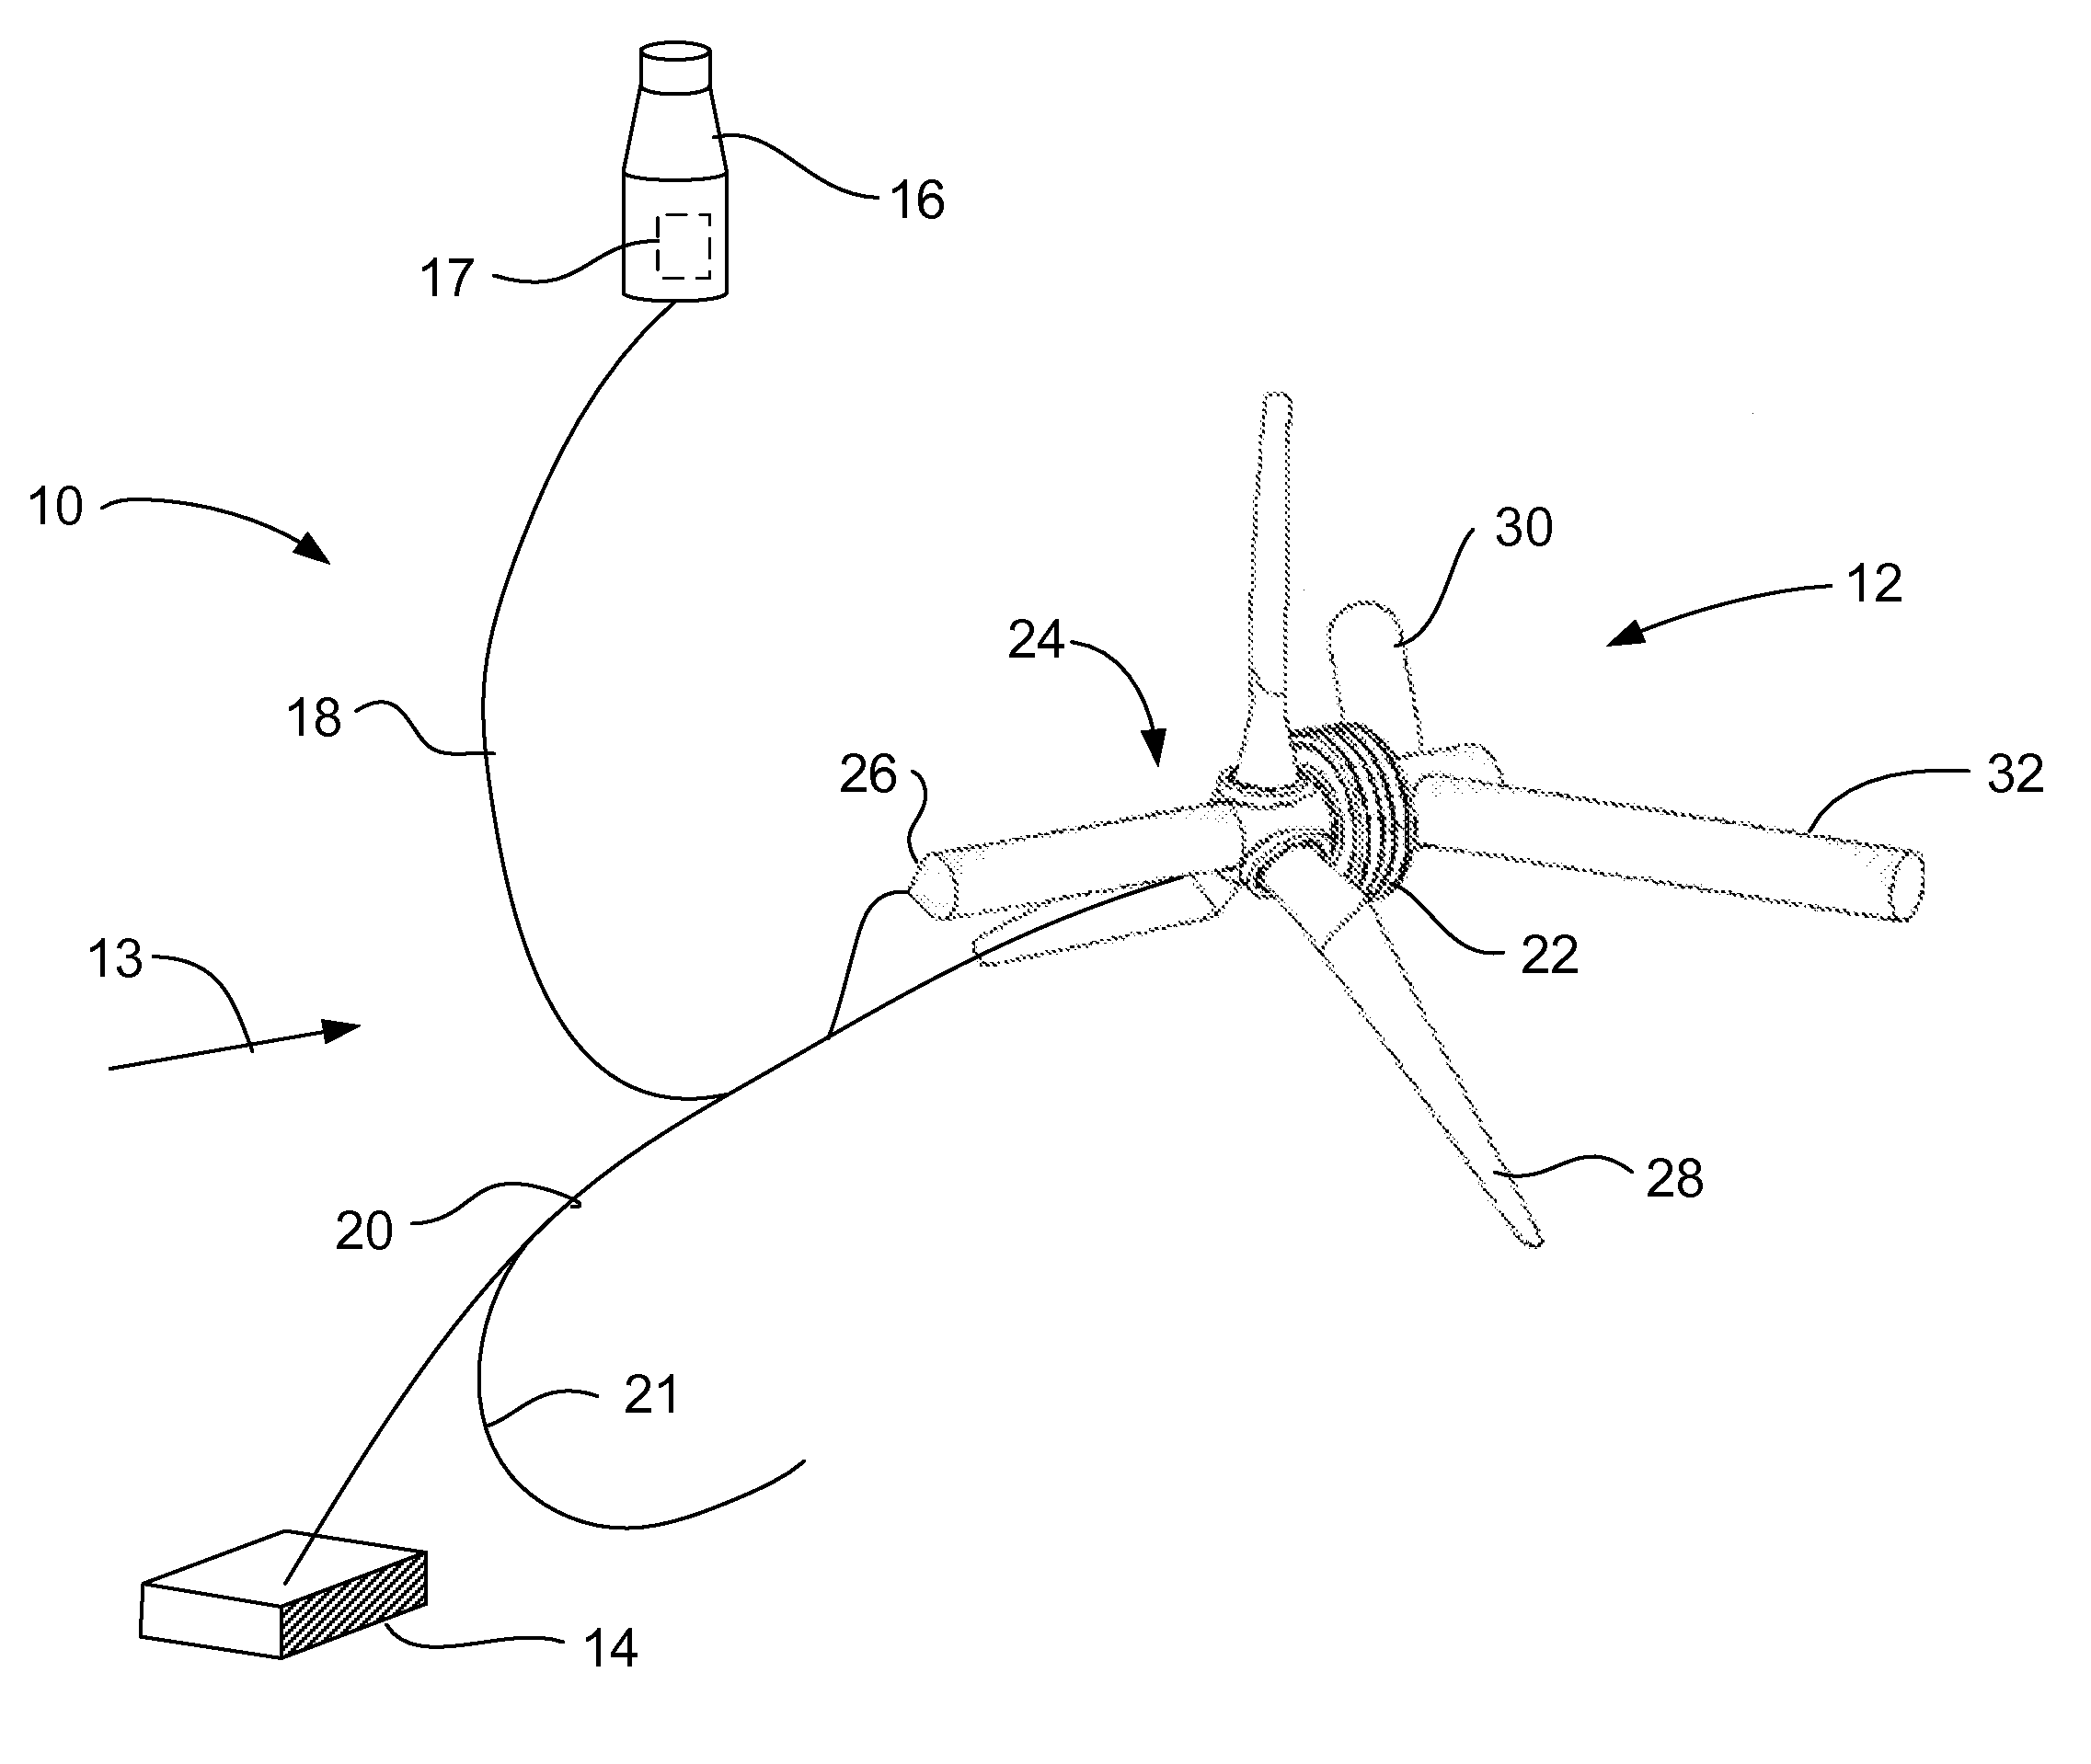 Water turbine system and method of operation